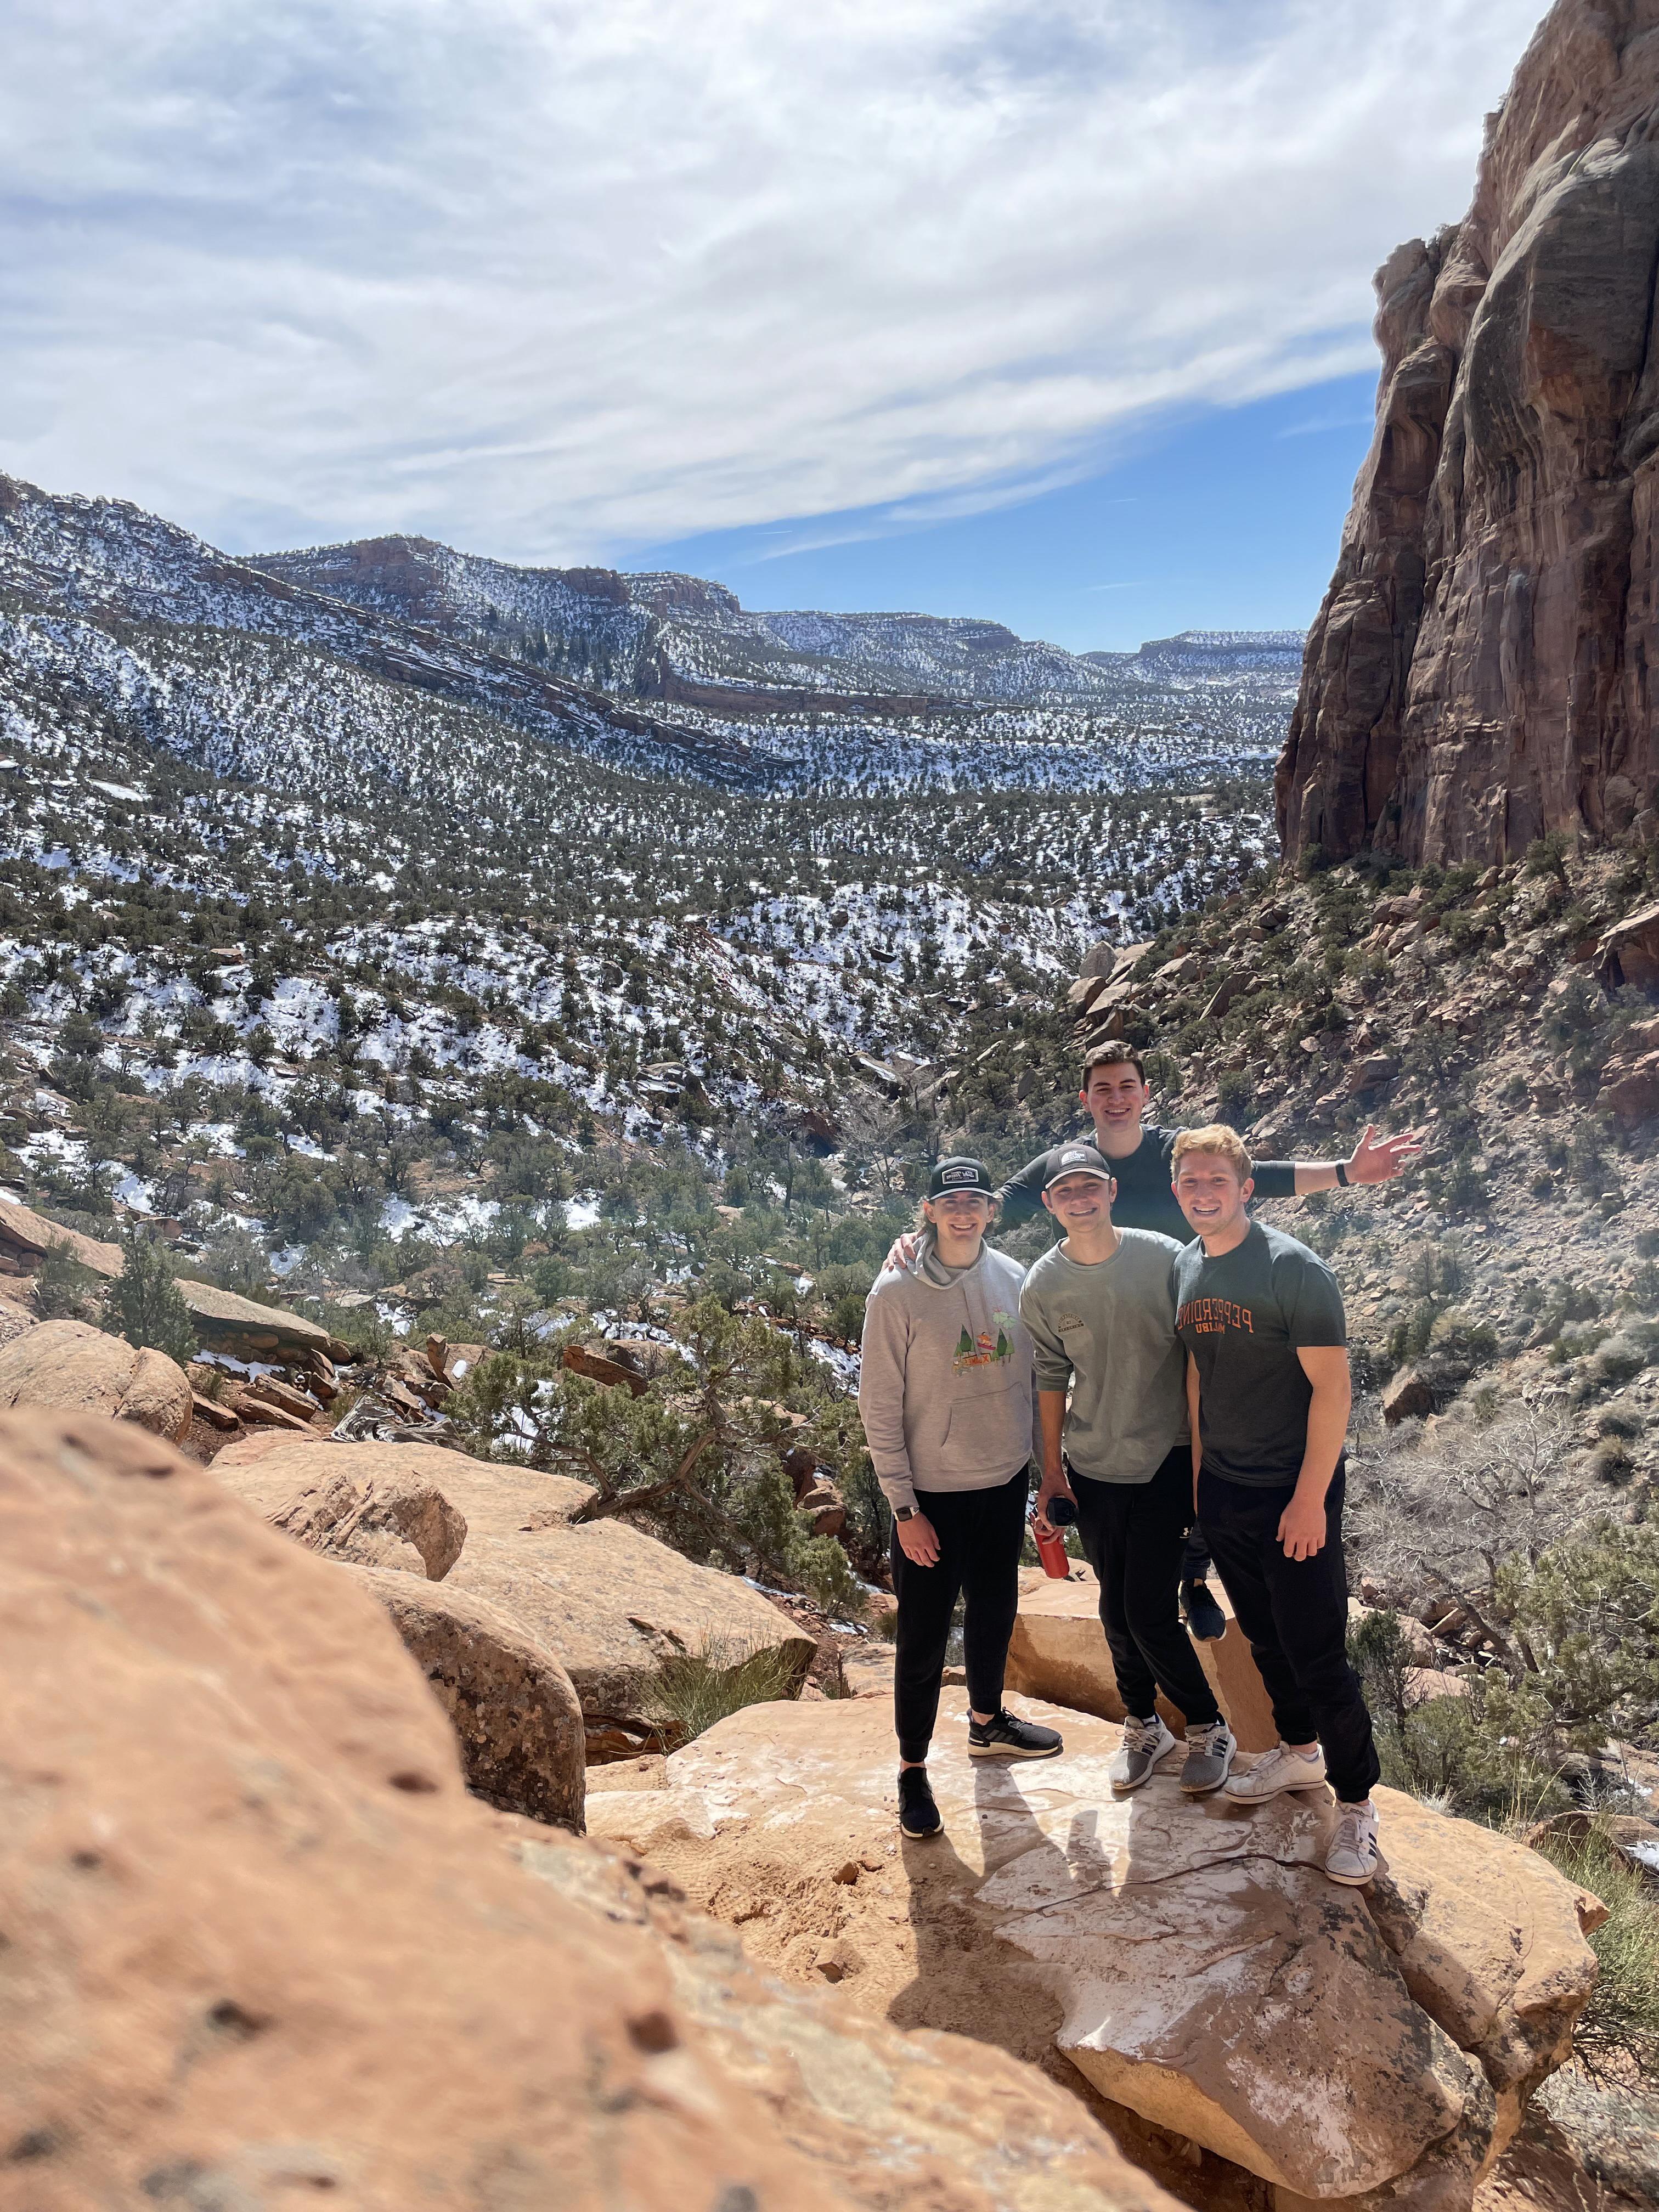 Hiking in the Colorado National Monument